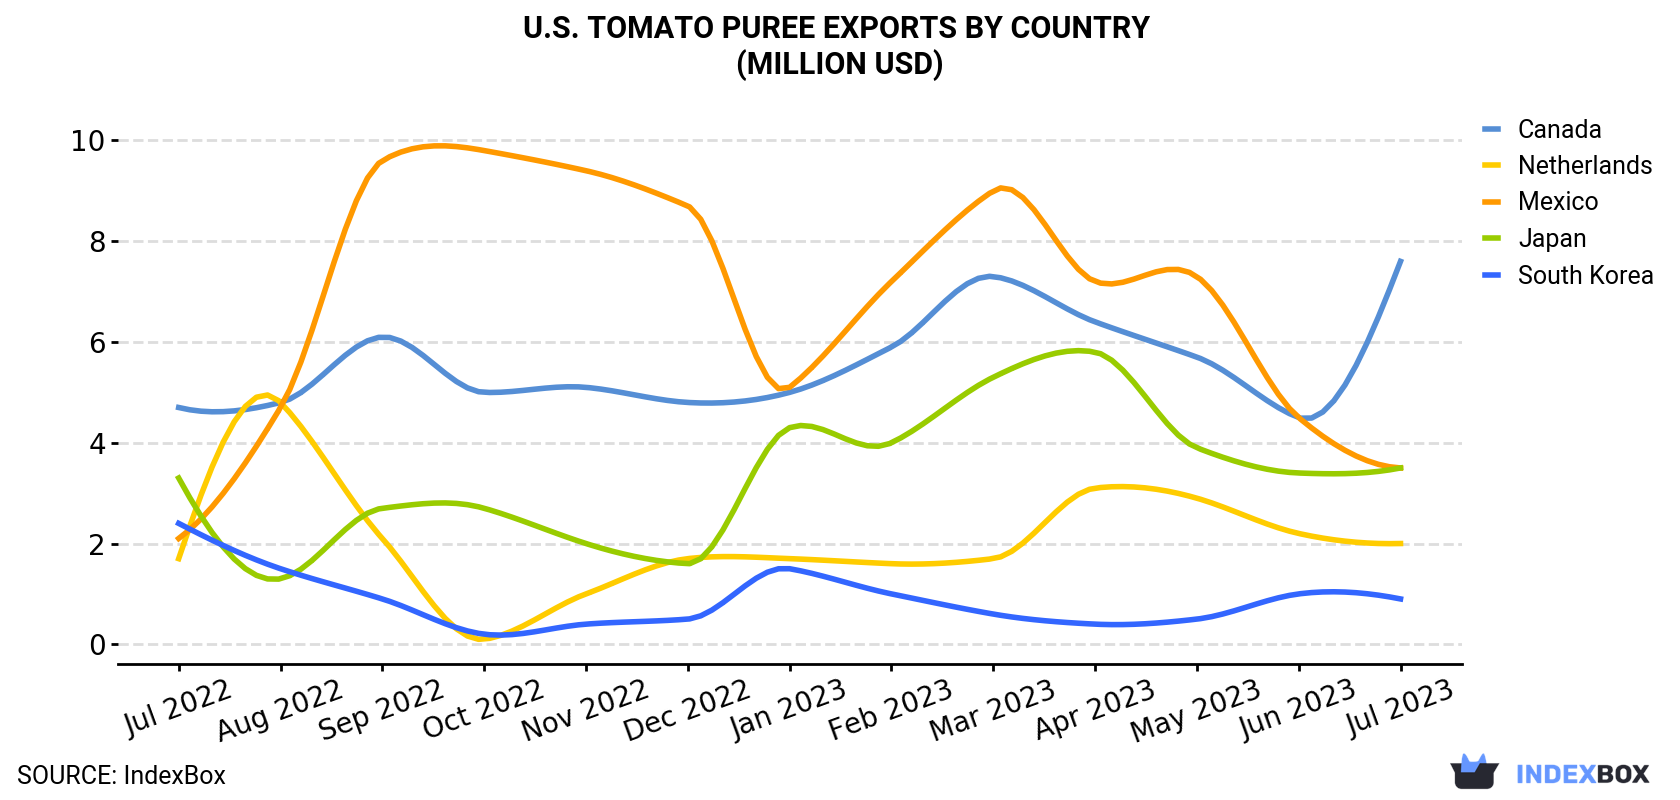 U.S. Tomato Puree Exports By Country (Million USD)